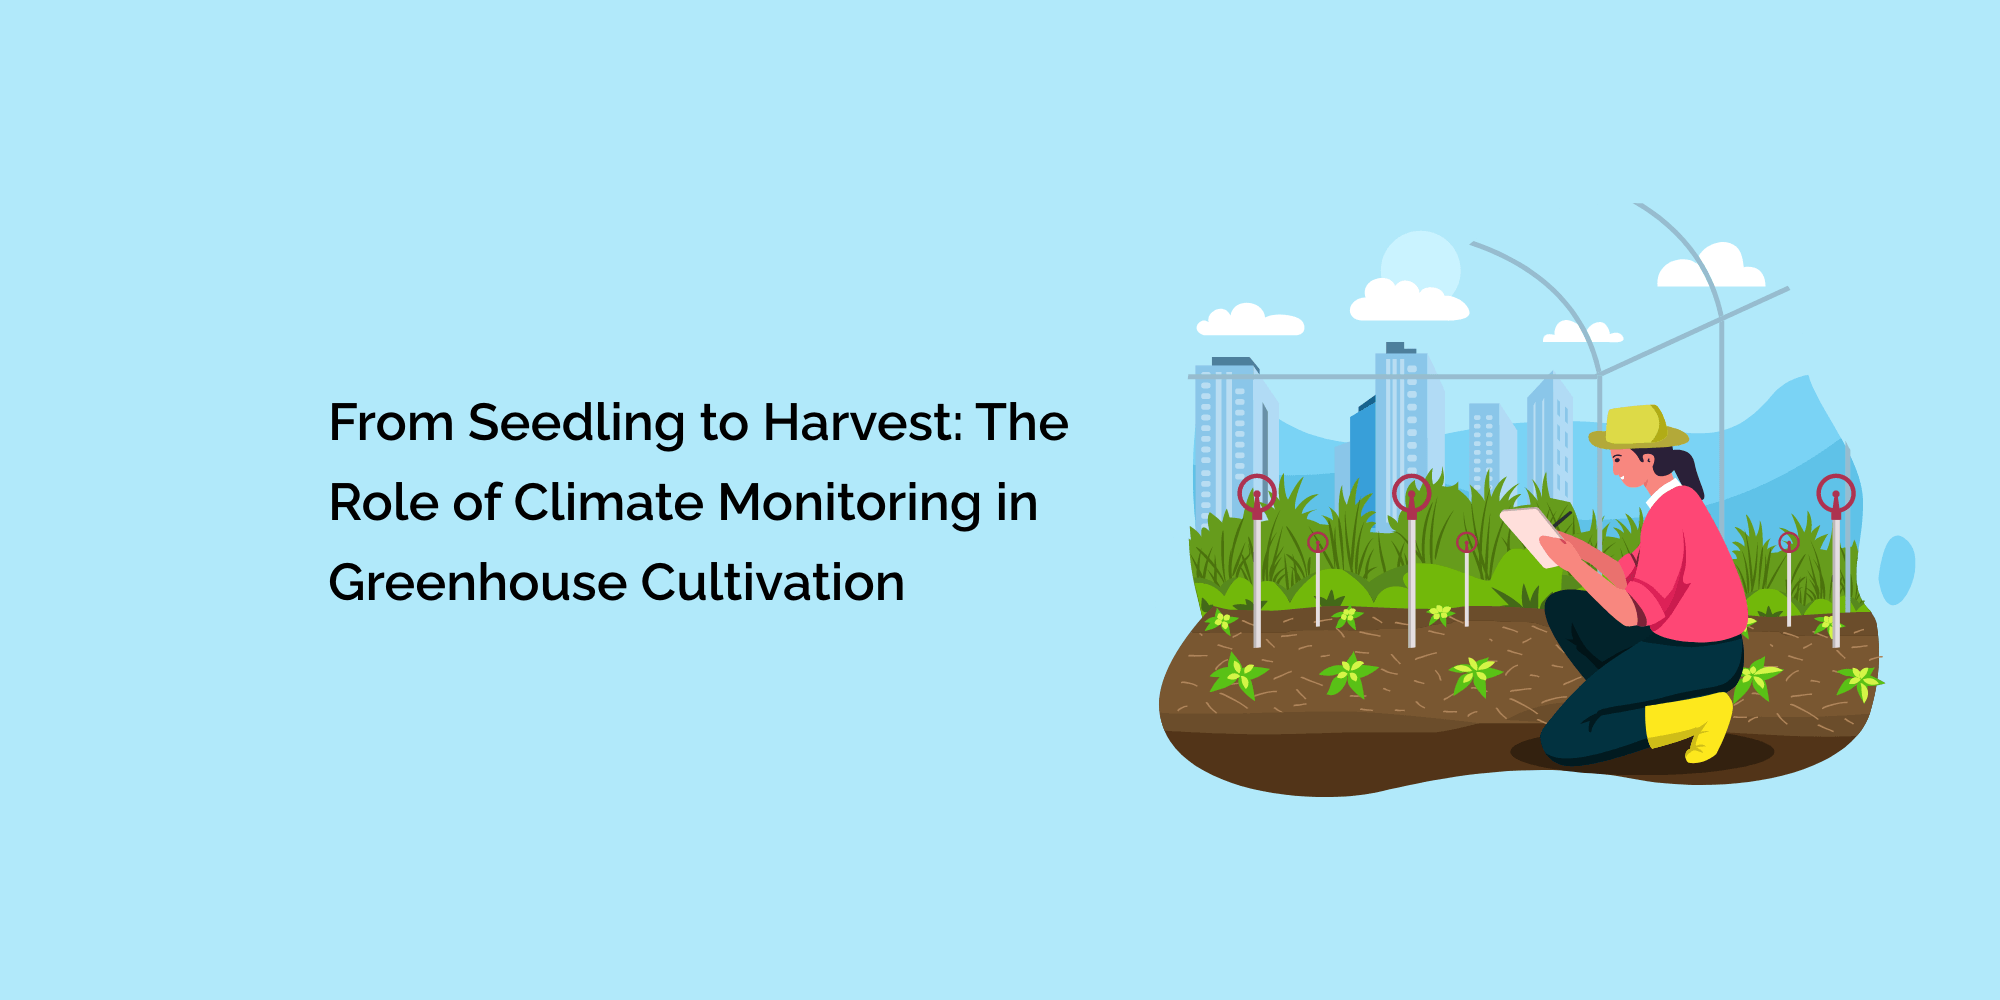 From Seedling to Harvest: The Role of Climate Monitoring in Greenhouse Cultivation